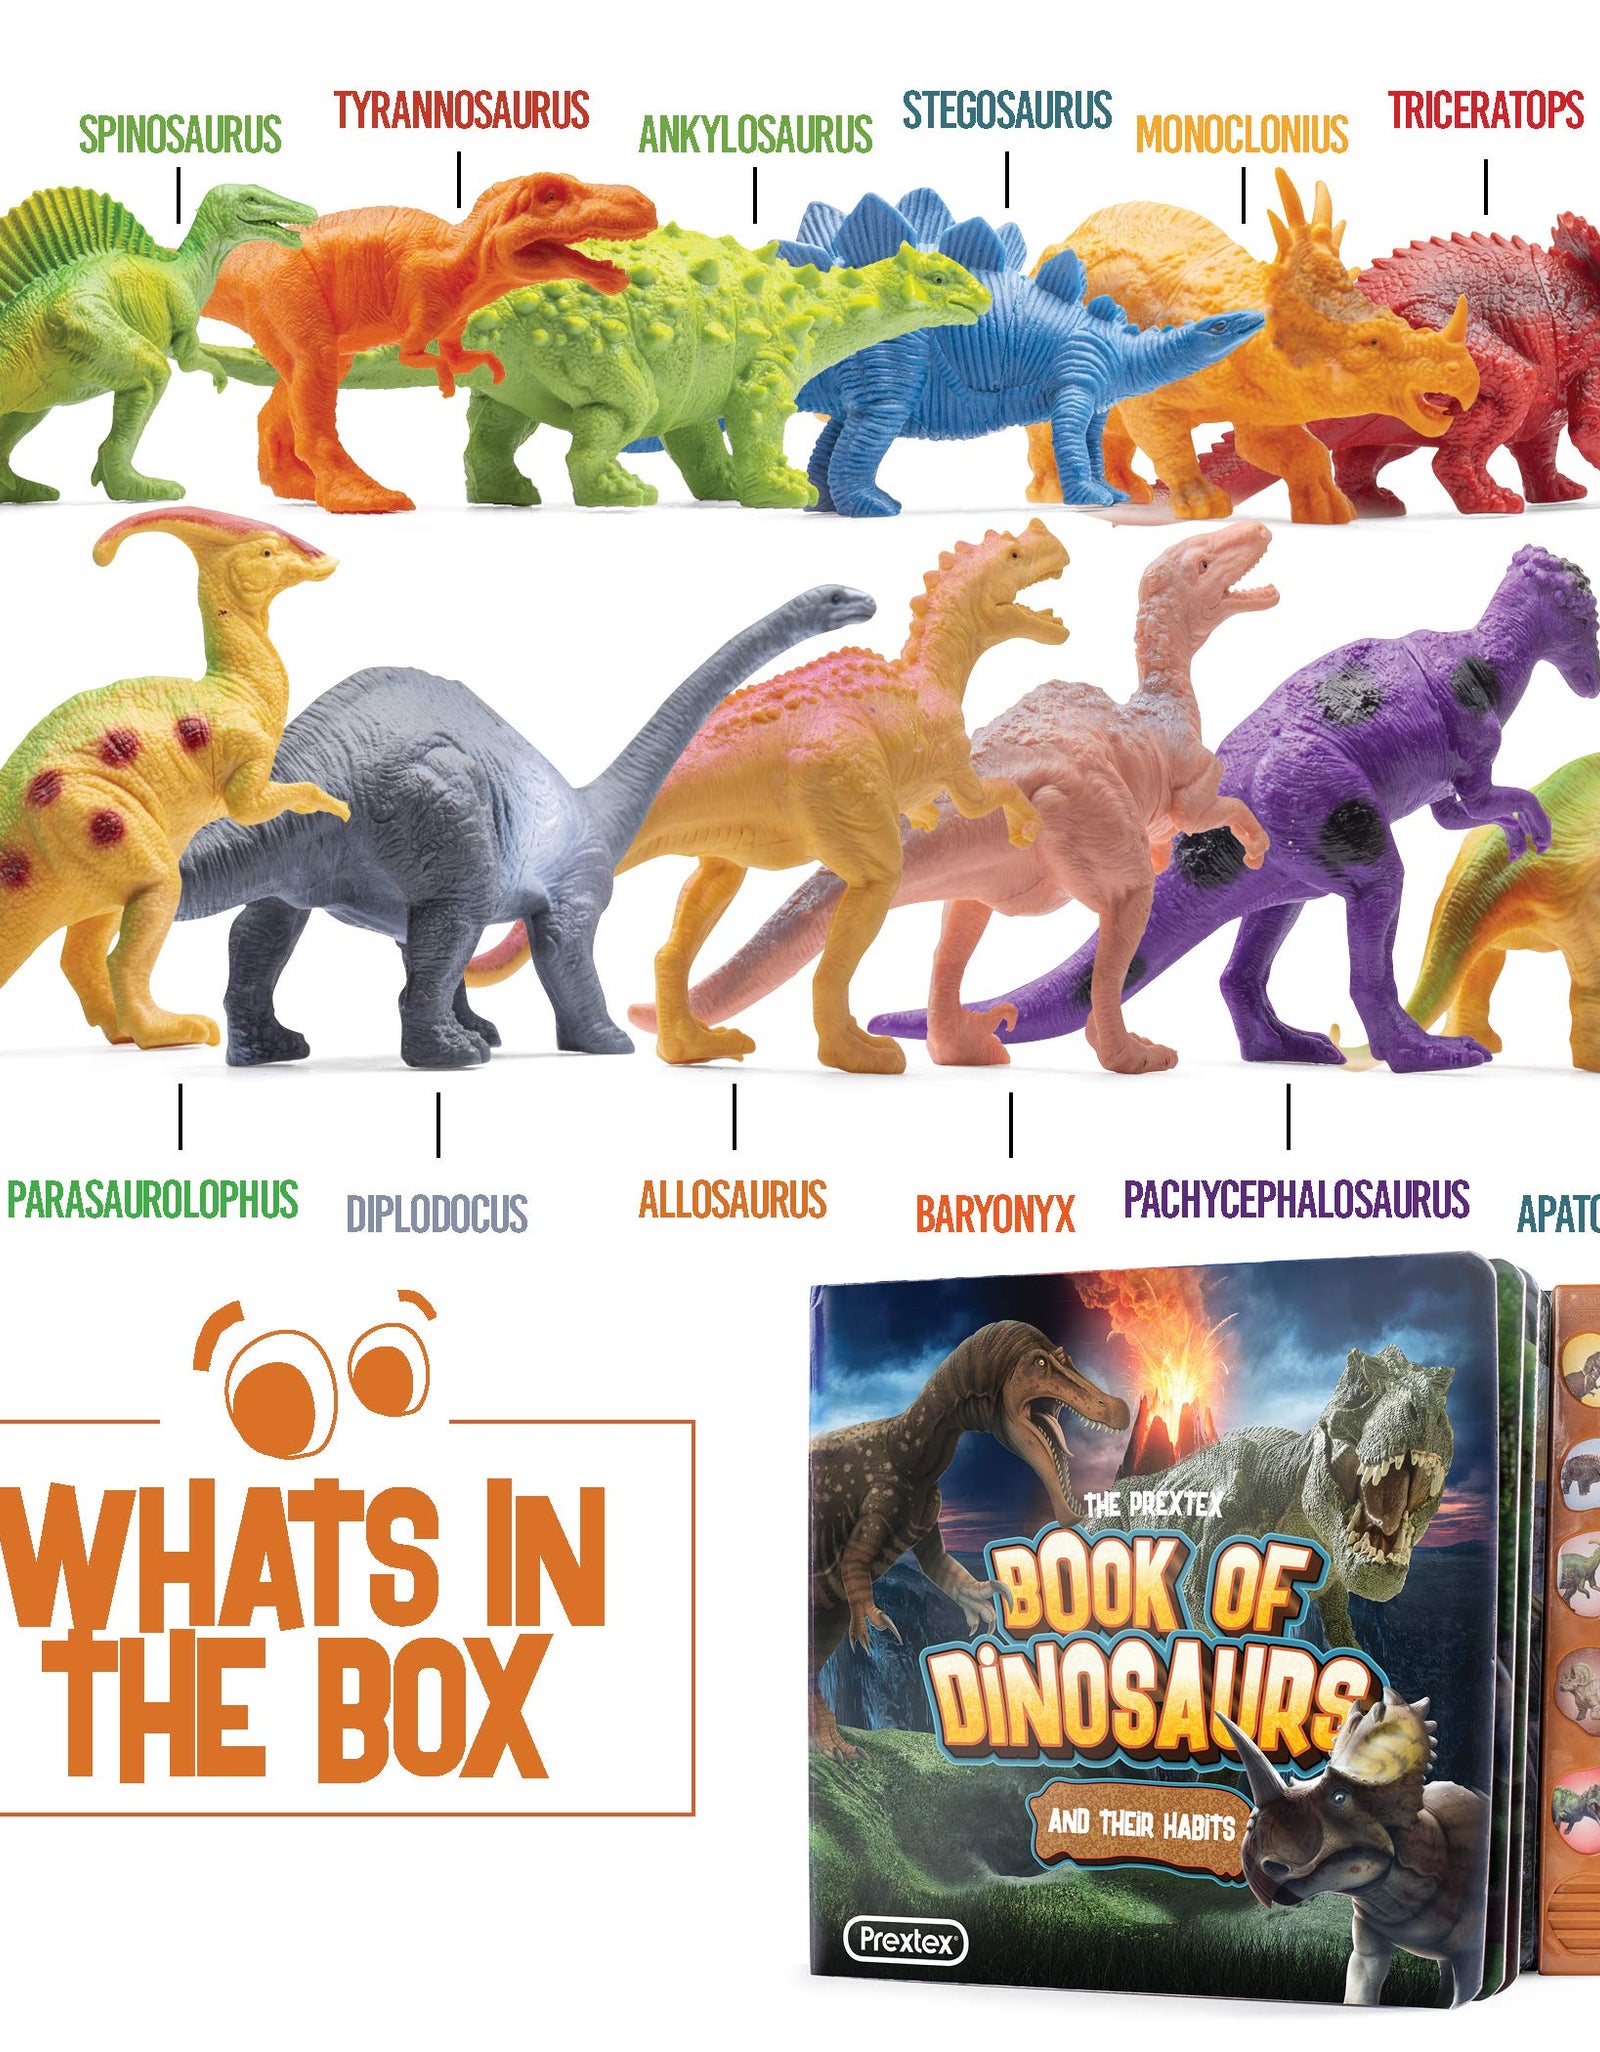 Prextex Realistic Looking Dinosaur With Interactive Dinosaur Sound Book - Pack of 12 Animal Dinosaur Figures with Illustrated Dinosaur Sound Book Toys for Boys and Girls 3 Years Old & Up